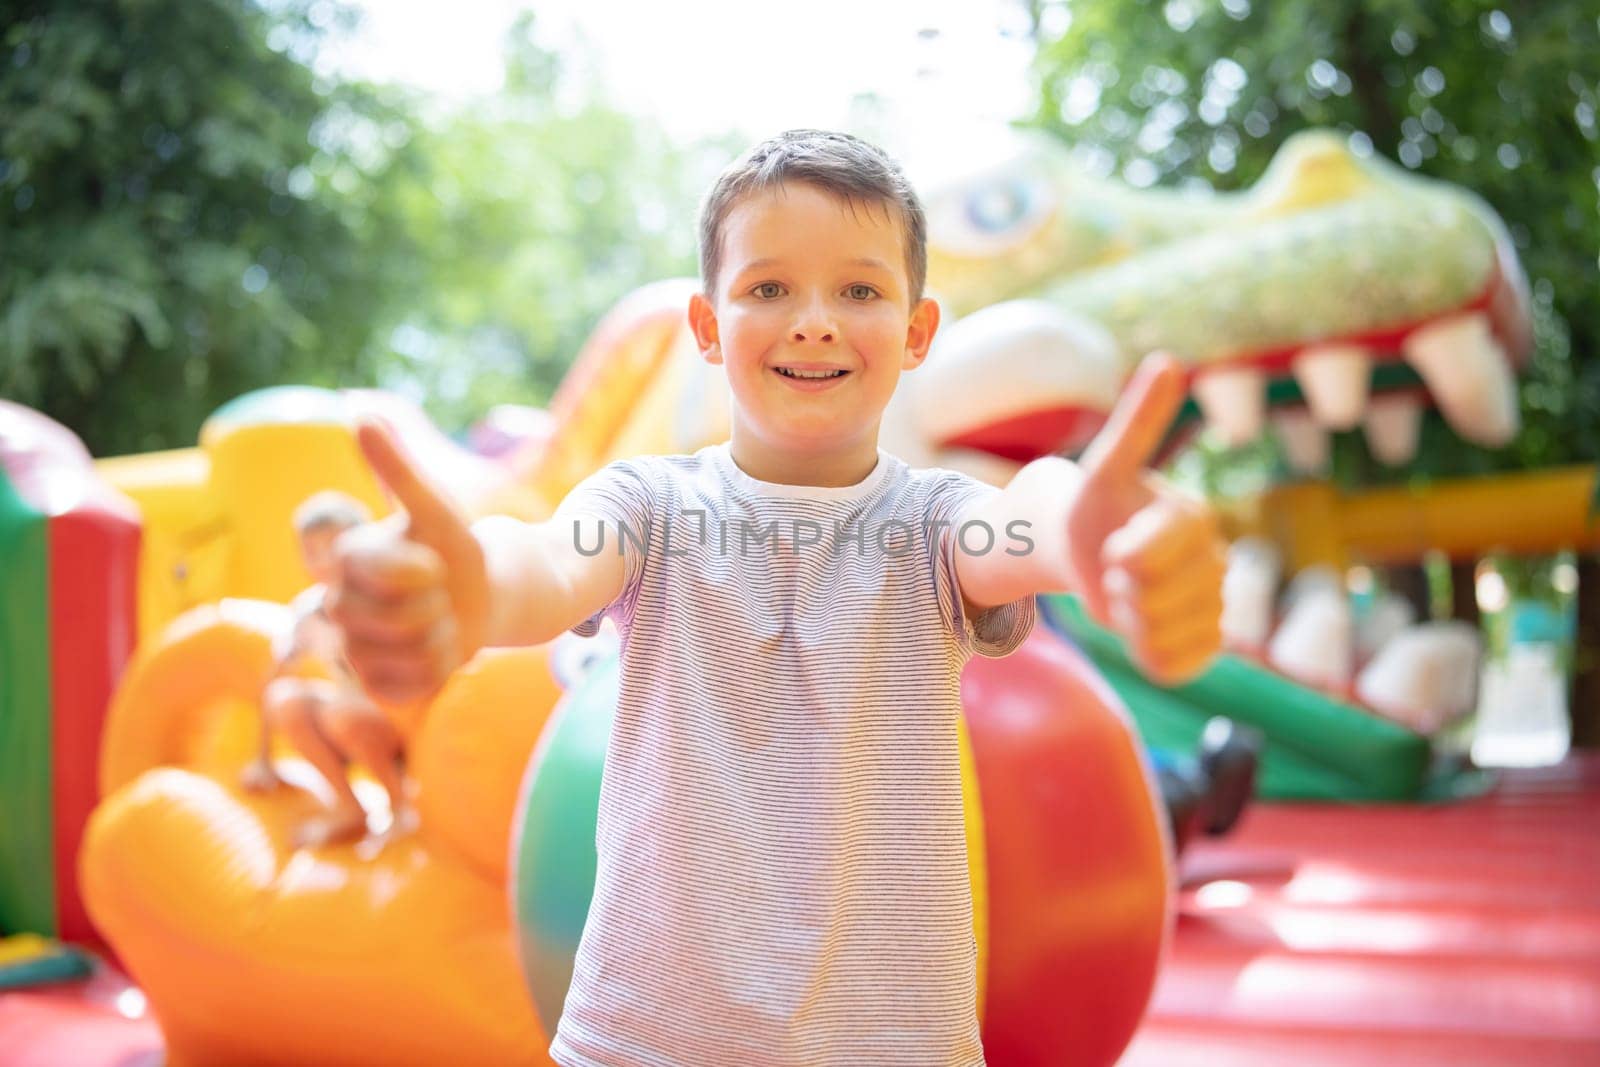 Happy boy having a lots of fun on a colorful inflate castle. Colorful playground. Activity and play center for kids.